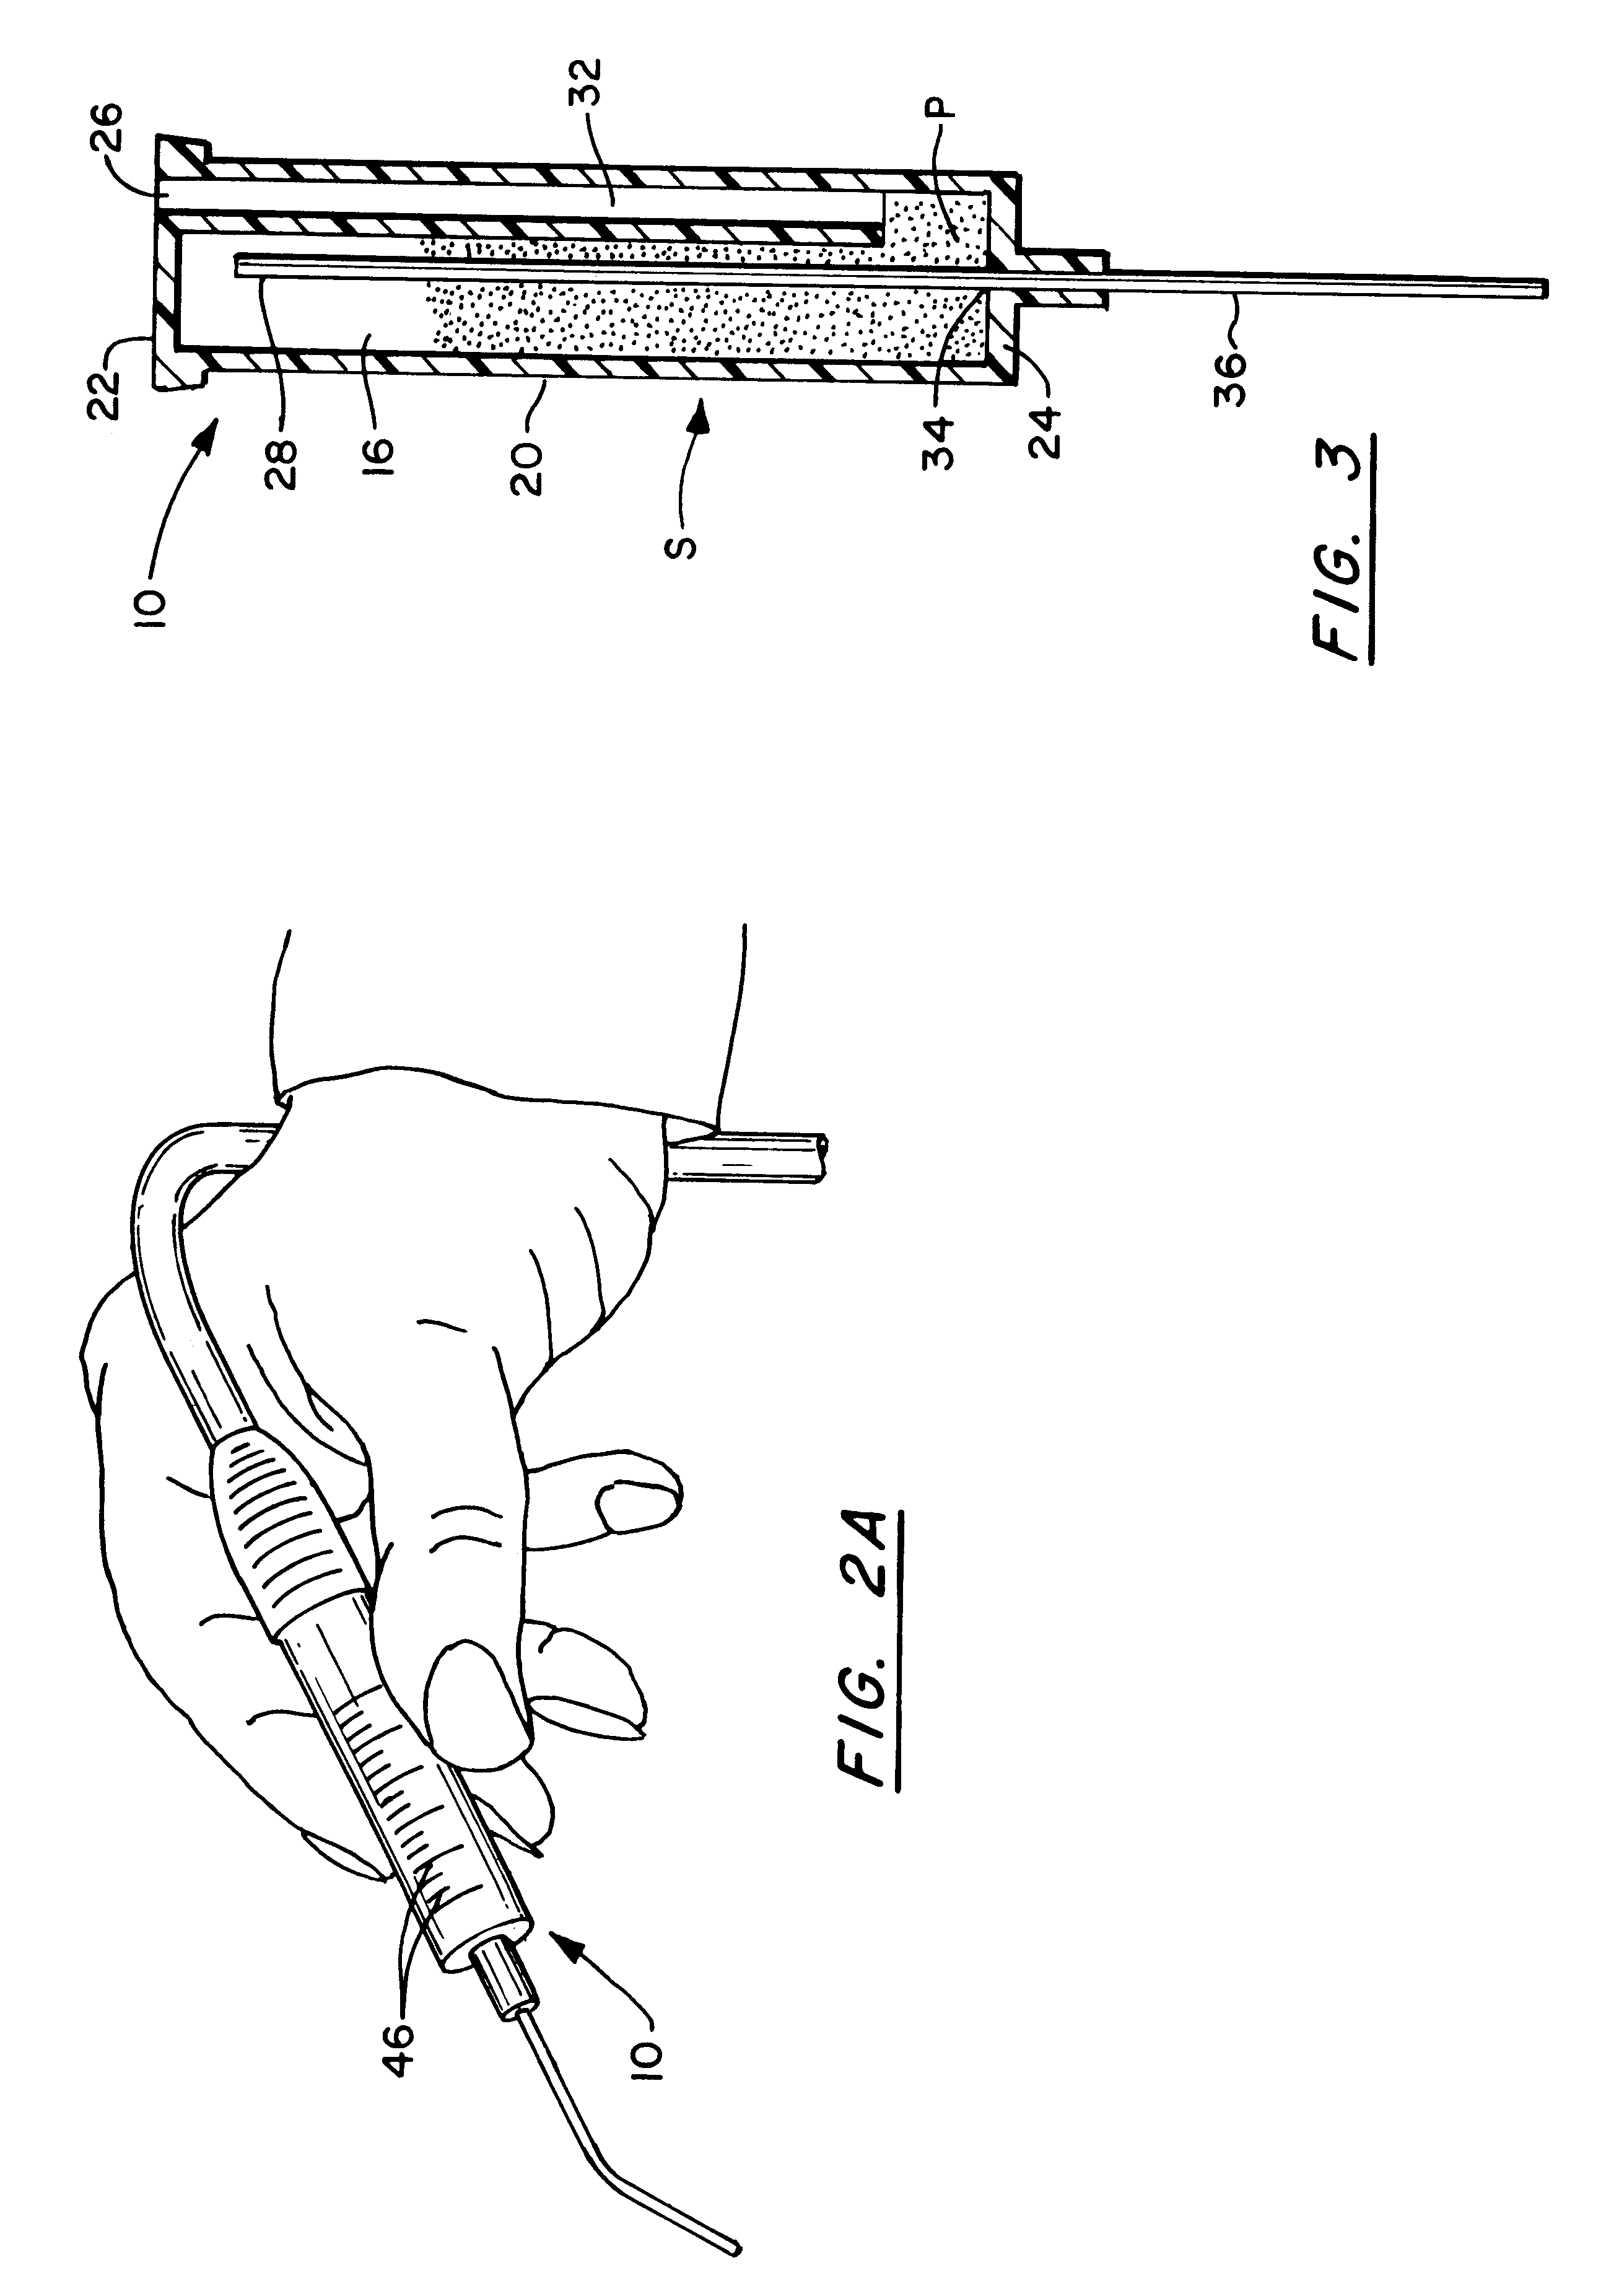 Handheld apparatus for propelling particulate matter against a surface of a patient's tooth, and method